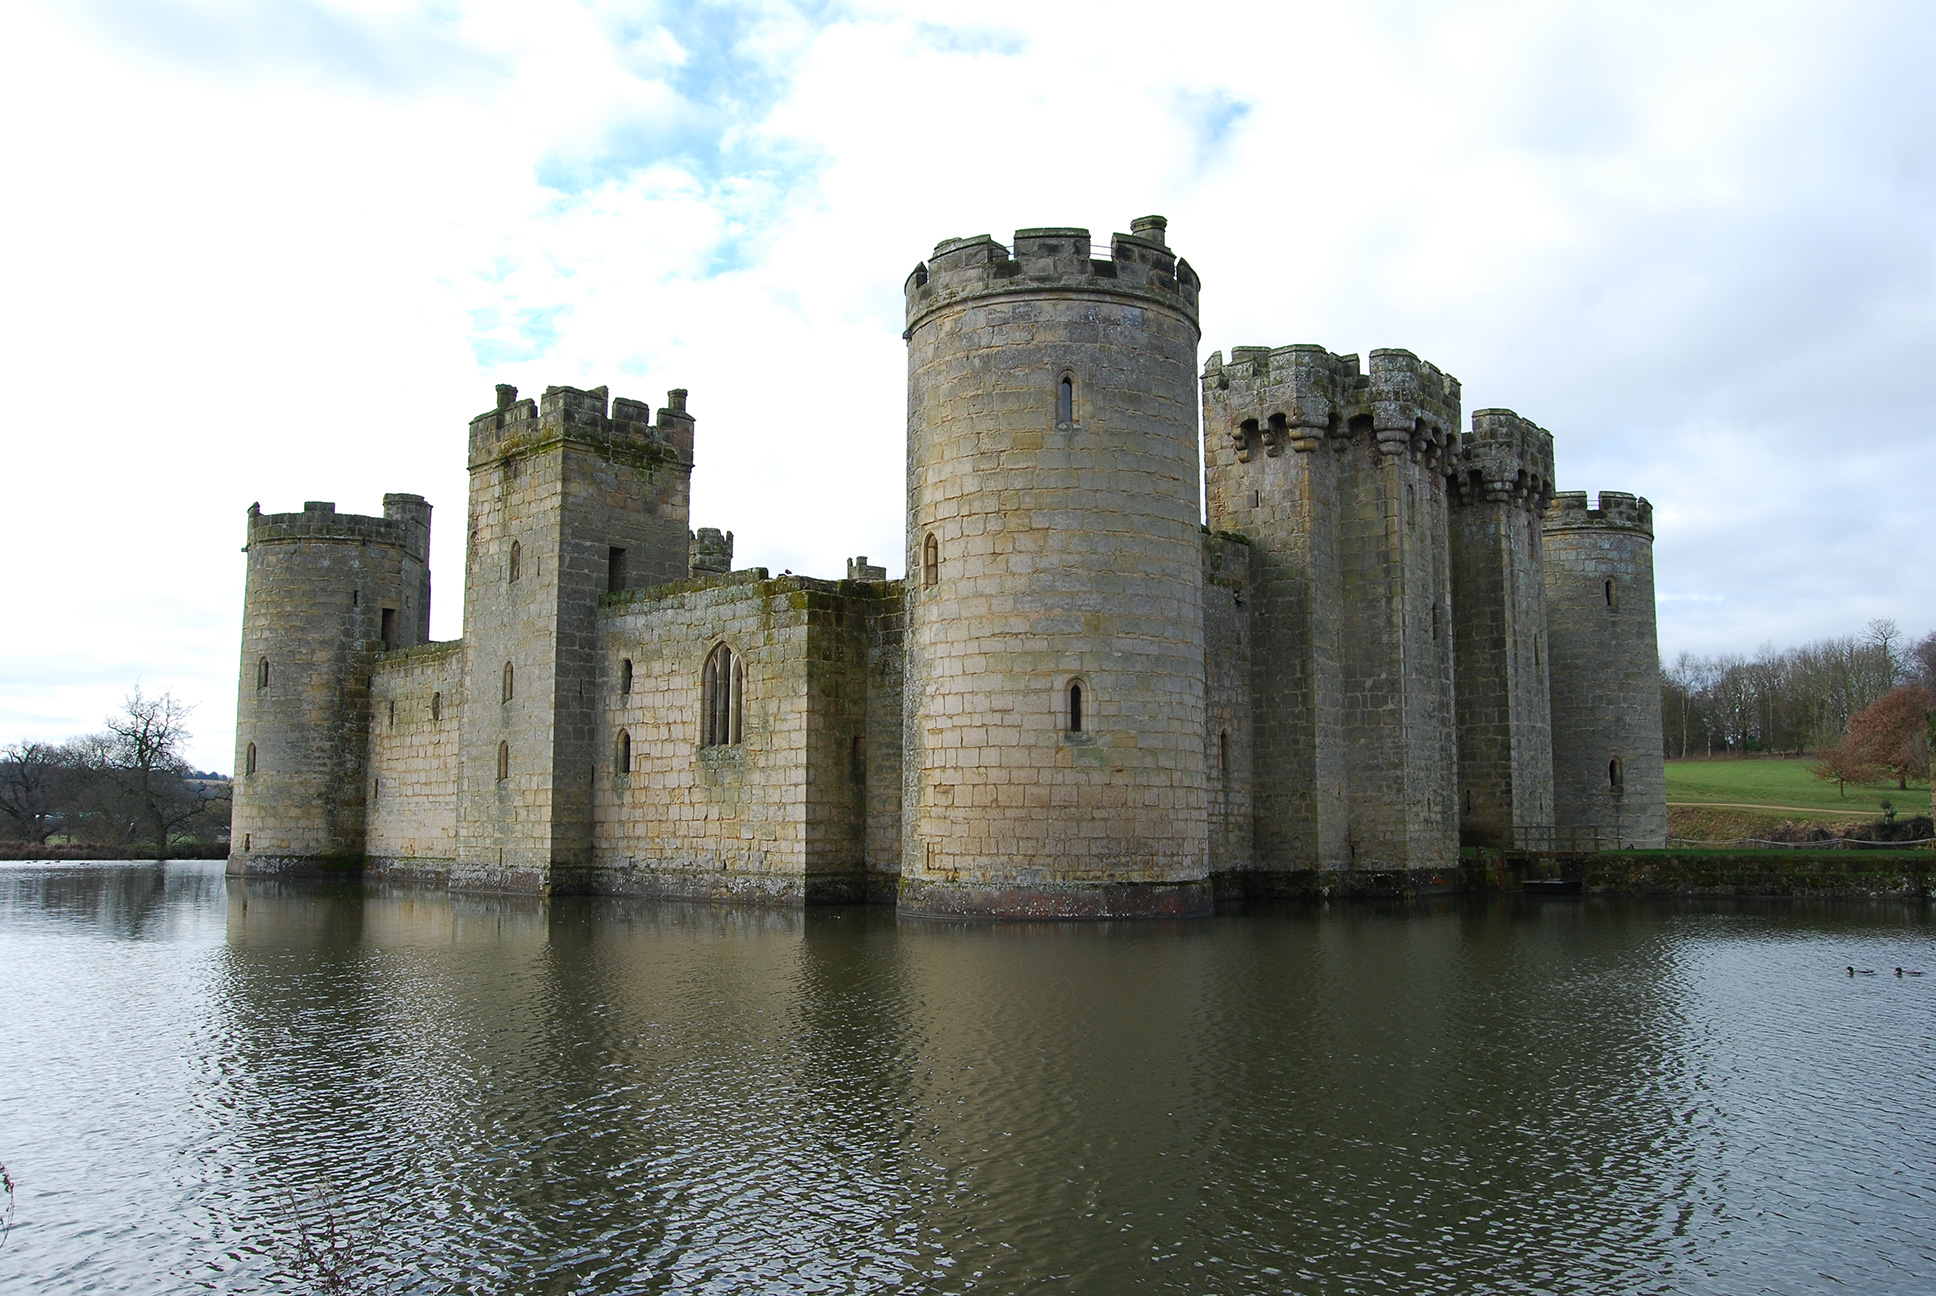 Great Castles - Legends - The Ghosts of Bodiam Castle